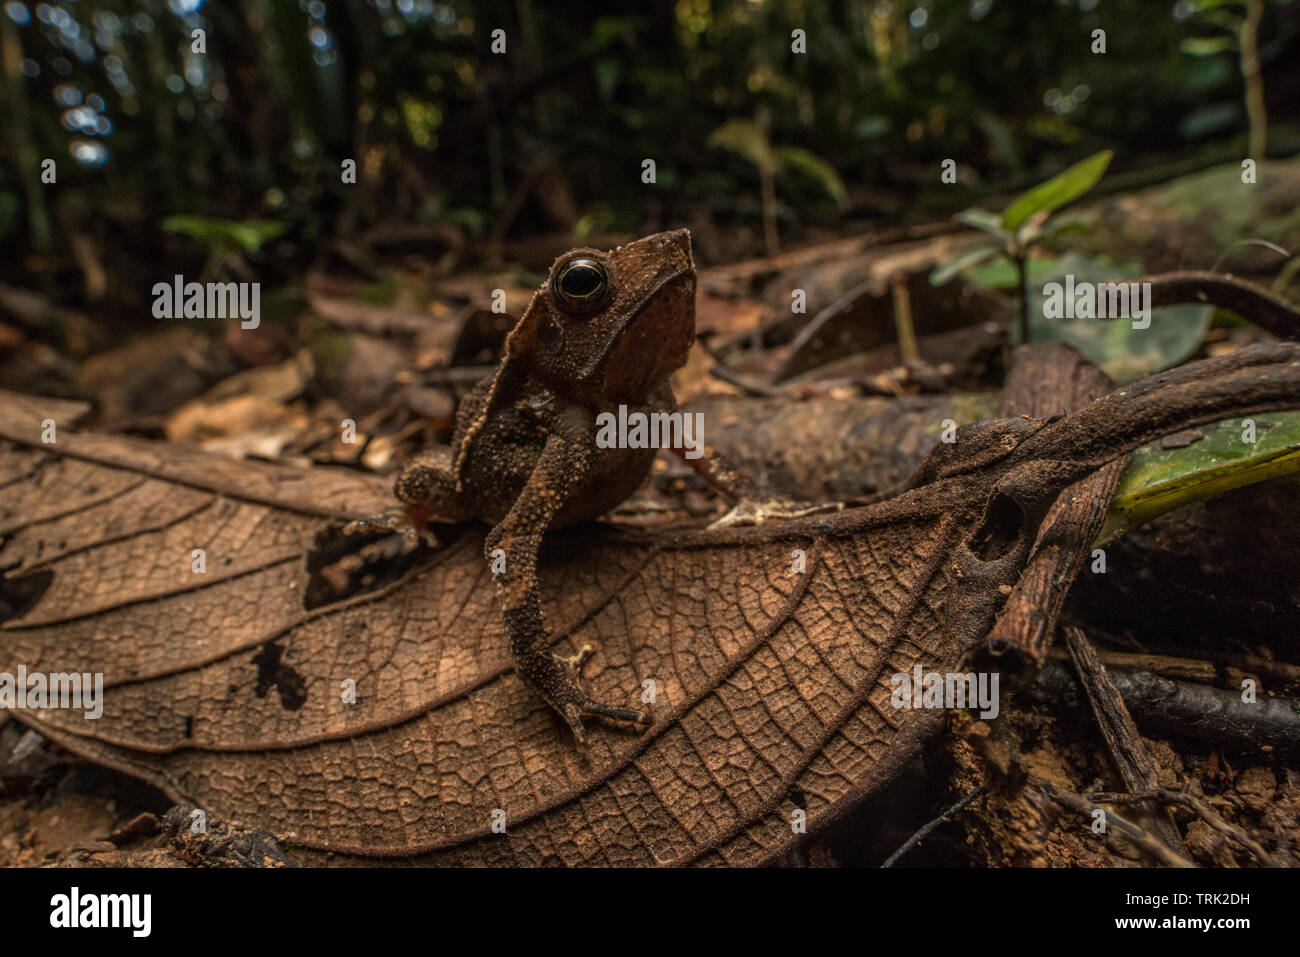 A common leaf litter toad (Rhinella margaritifera) sitting on the forest floor in the Amazon jungle in Ecuador. Stock Photo